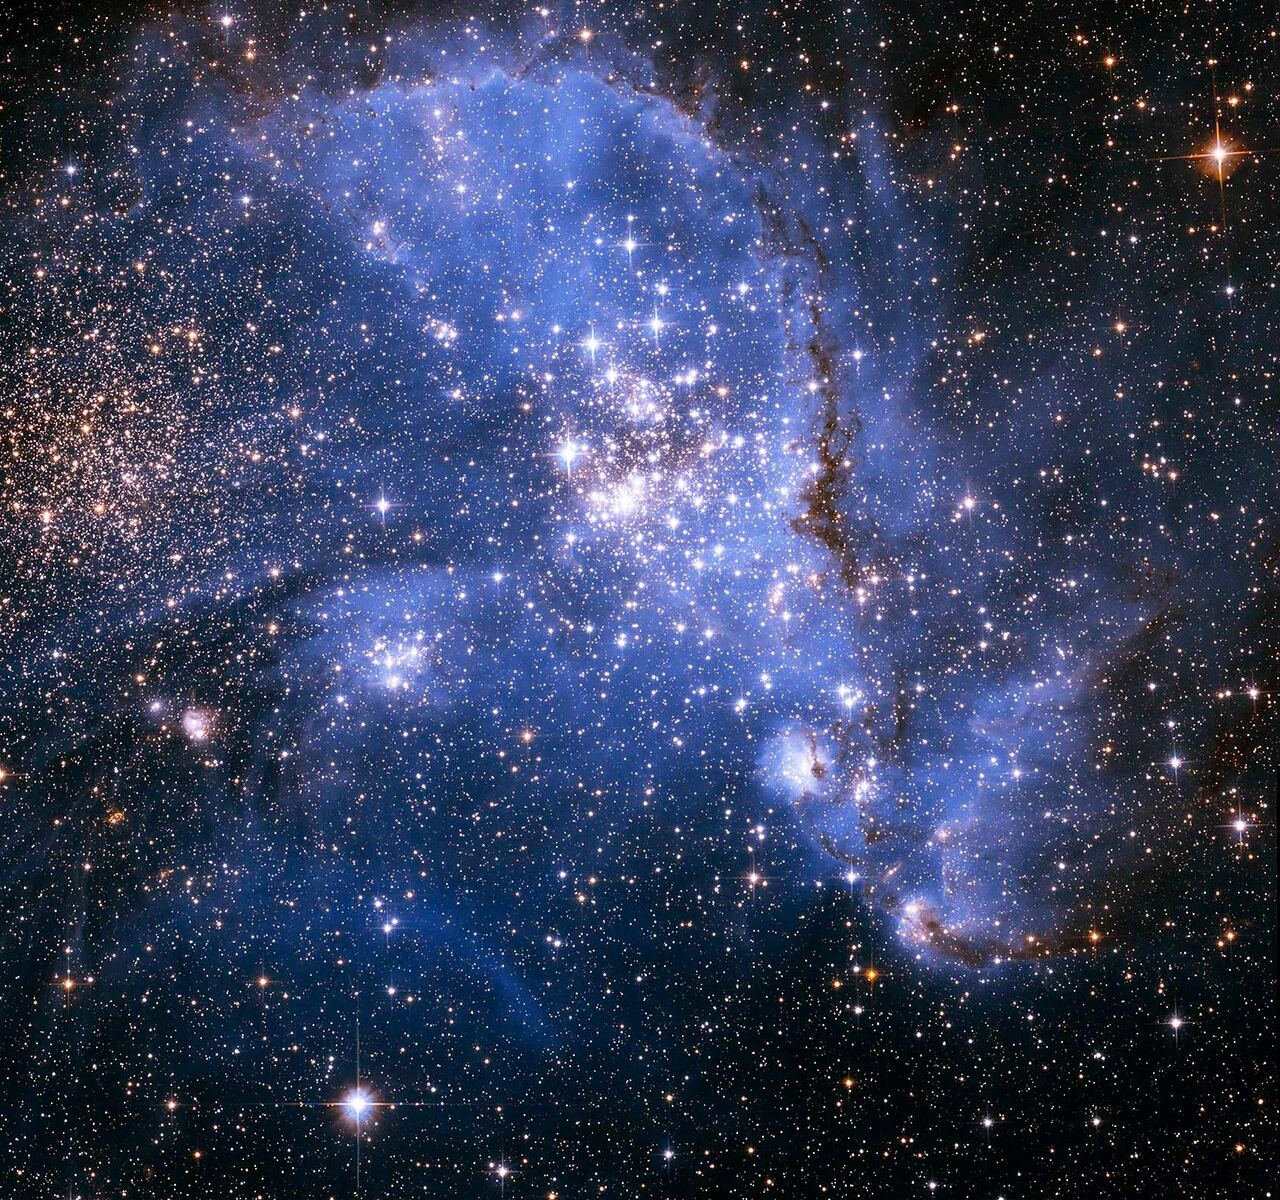 Image of NGC 346, a stellar nursery where astronomers have discovered newborn stars spiralling in towards the center of a nebula